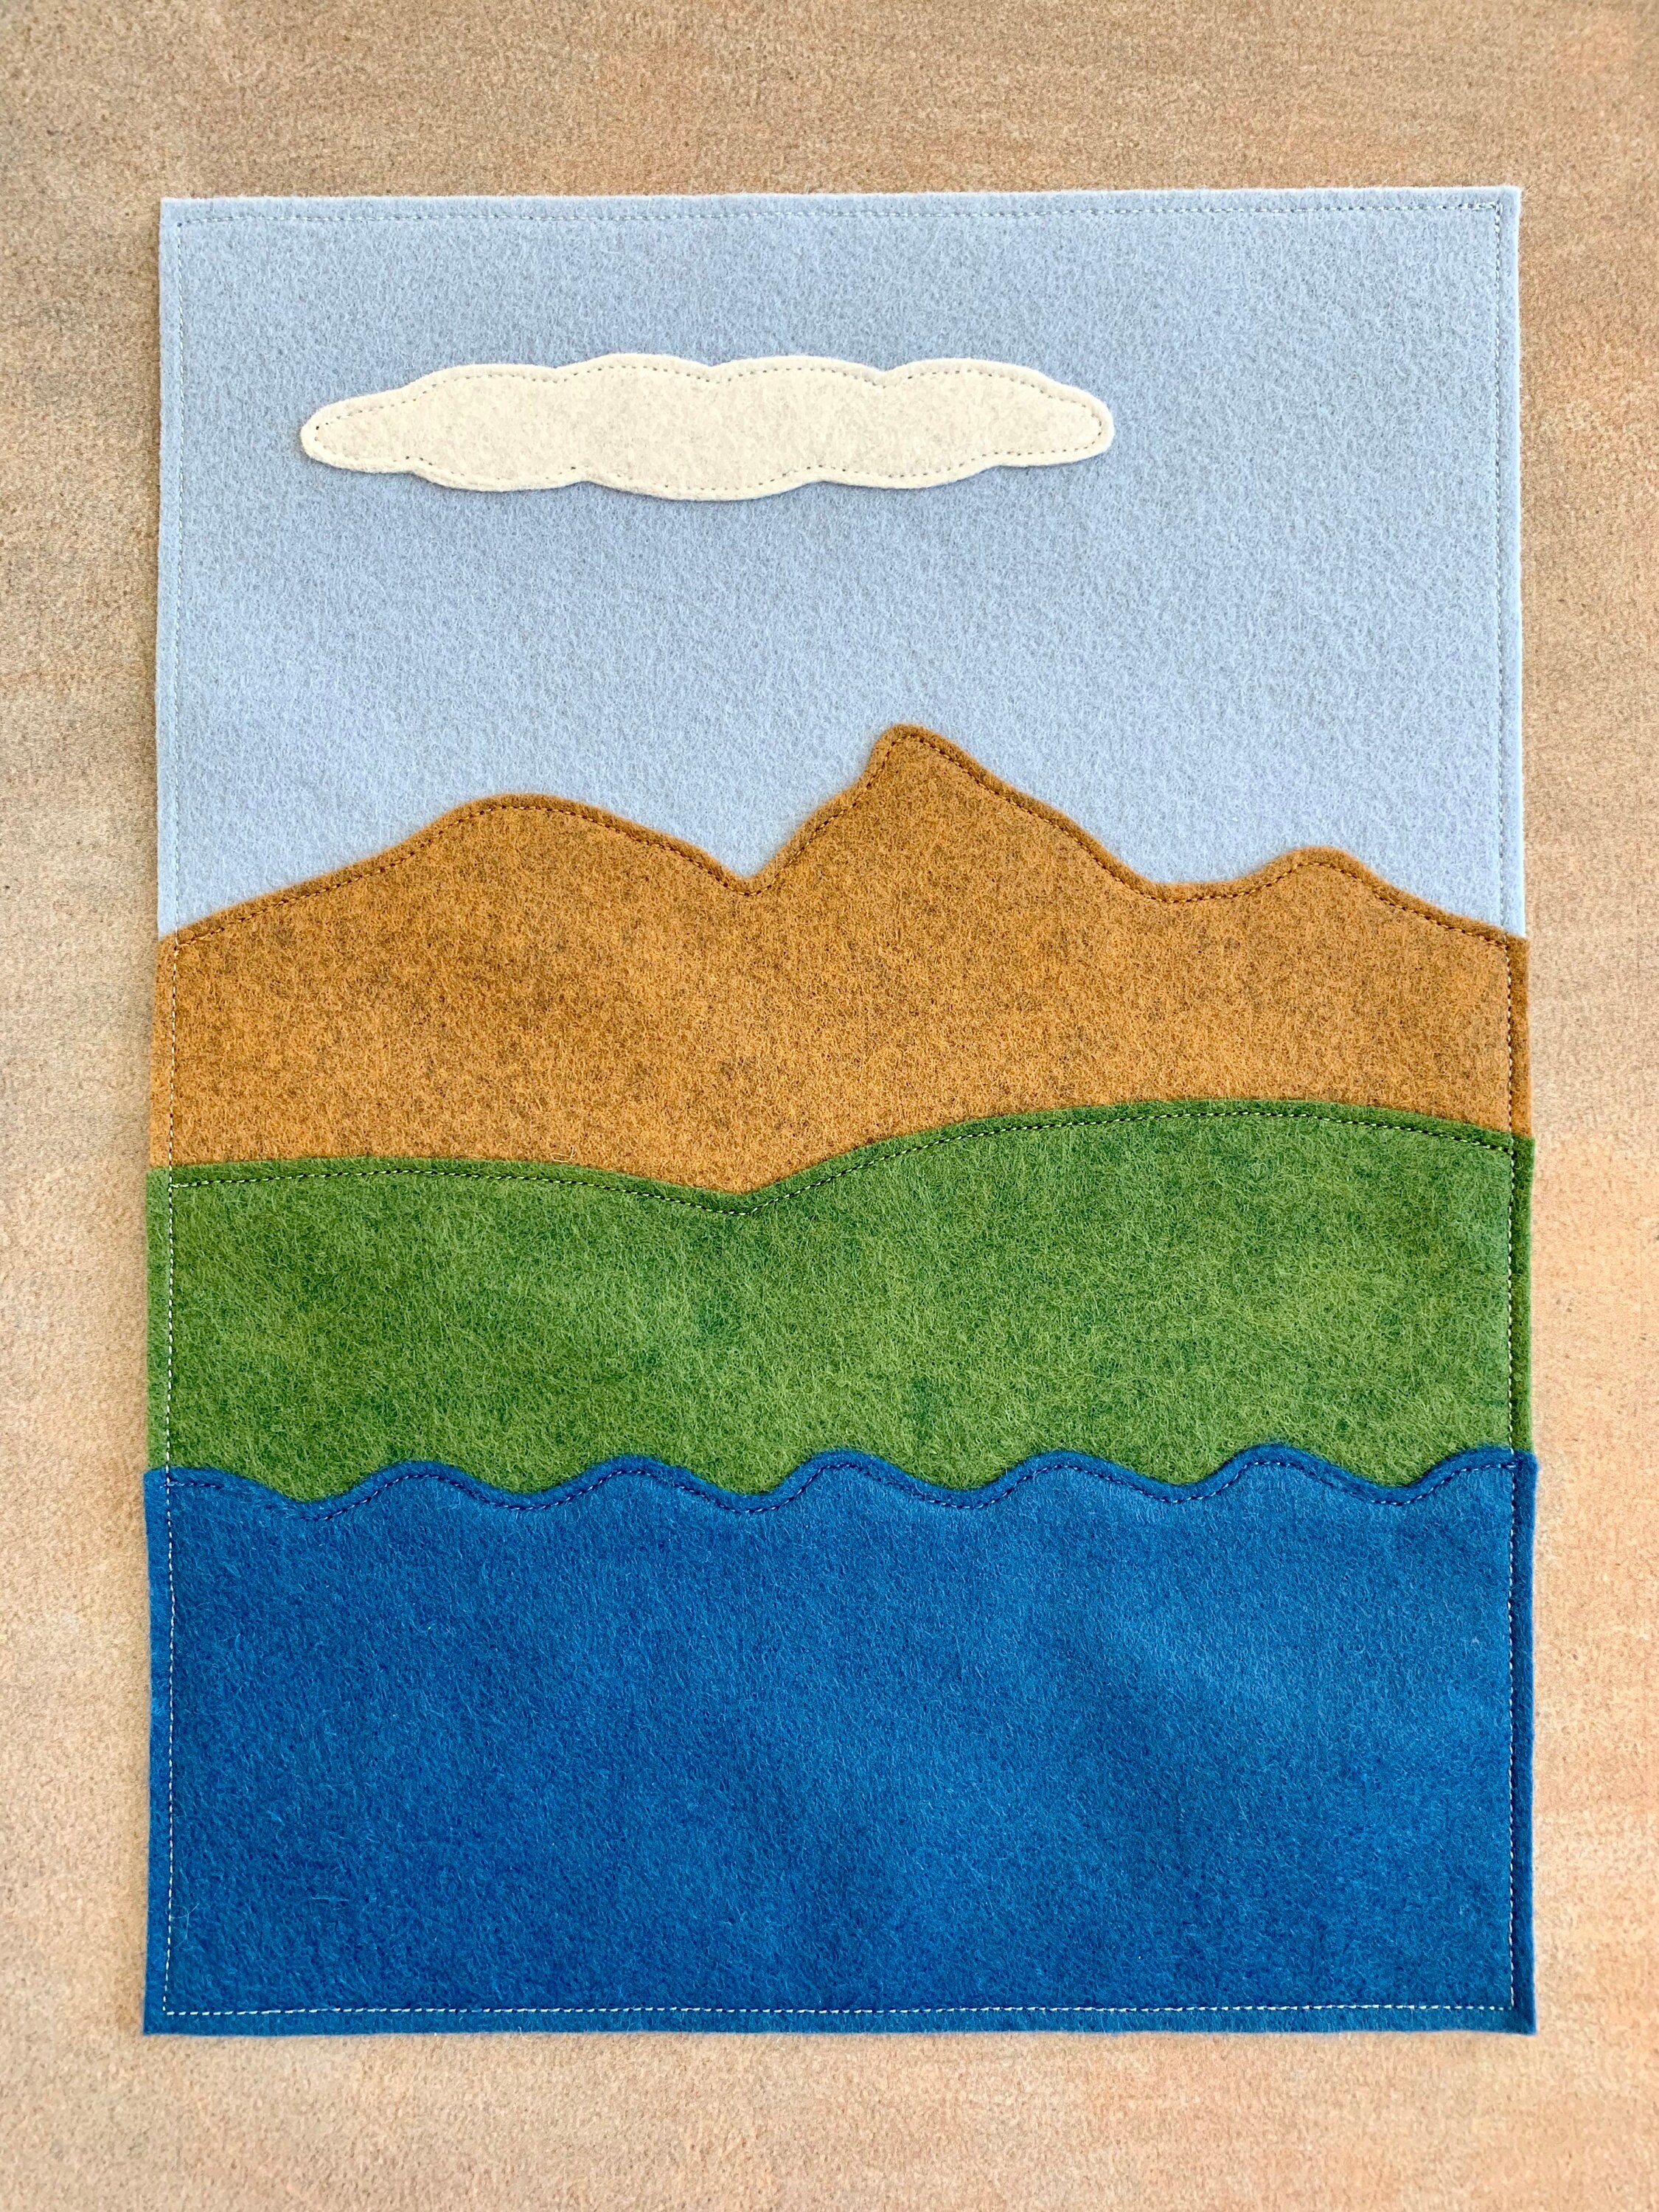 Air Land and Water Learn/play/sort Felt Mat Montessori image